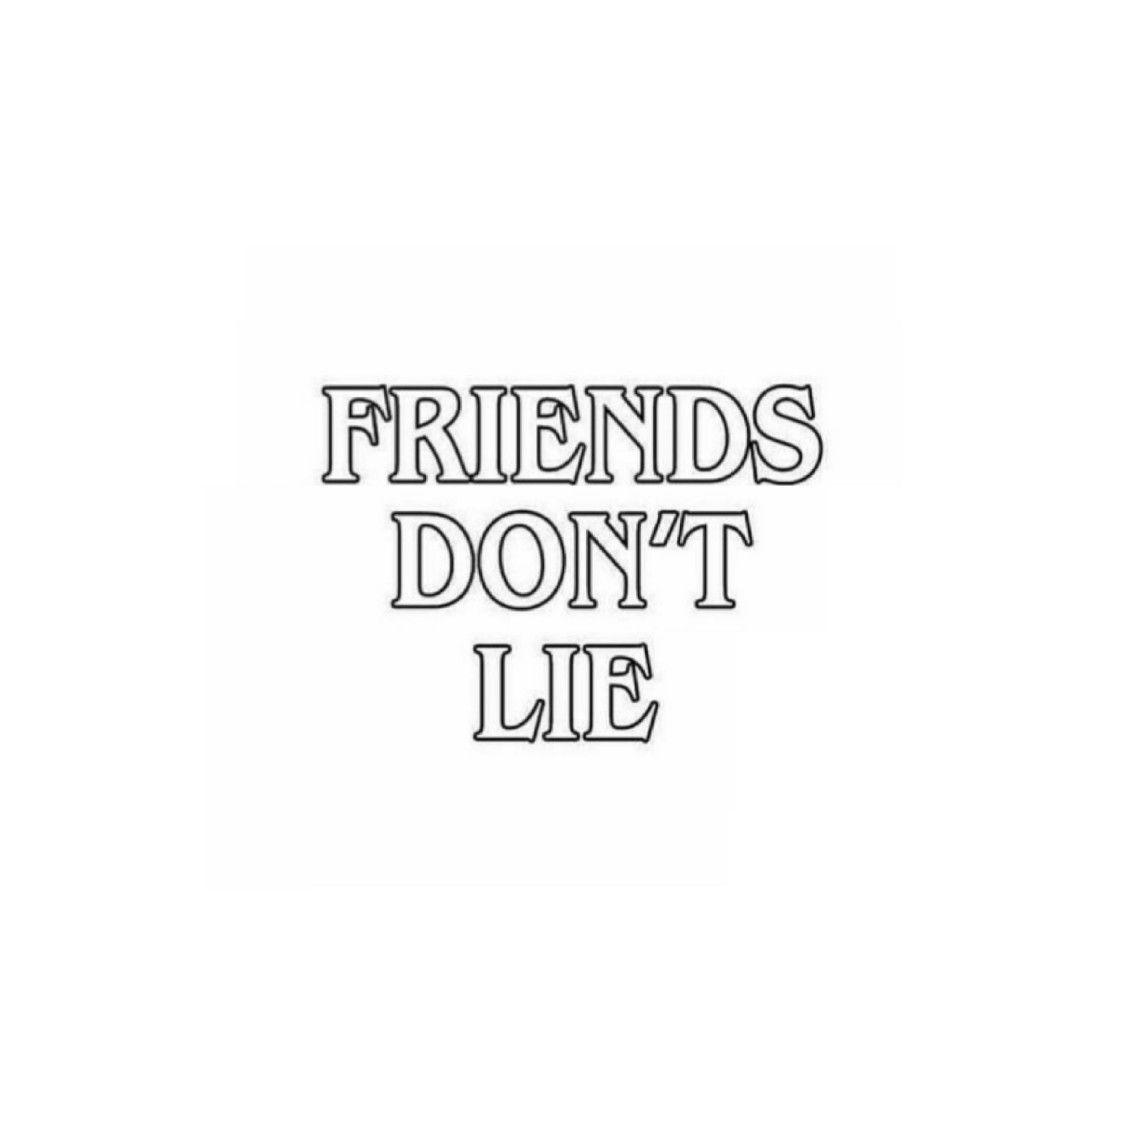 FRIENDS DONT LIE wallpaper by Asafcohen05  Download on ZEDGE  ced8